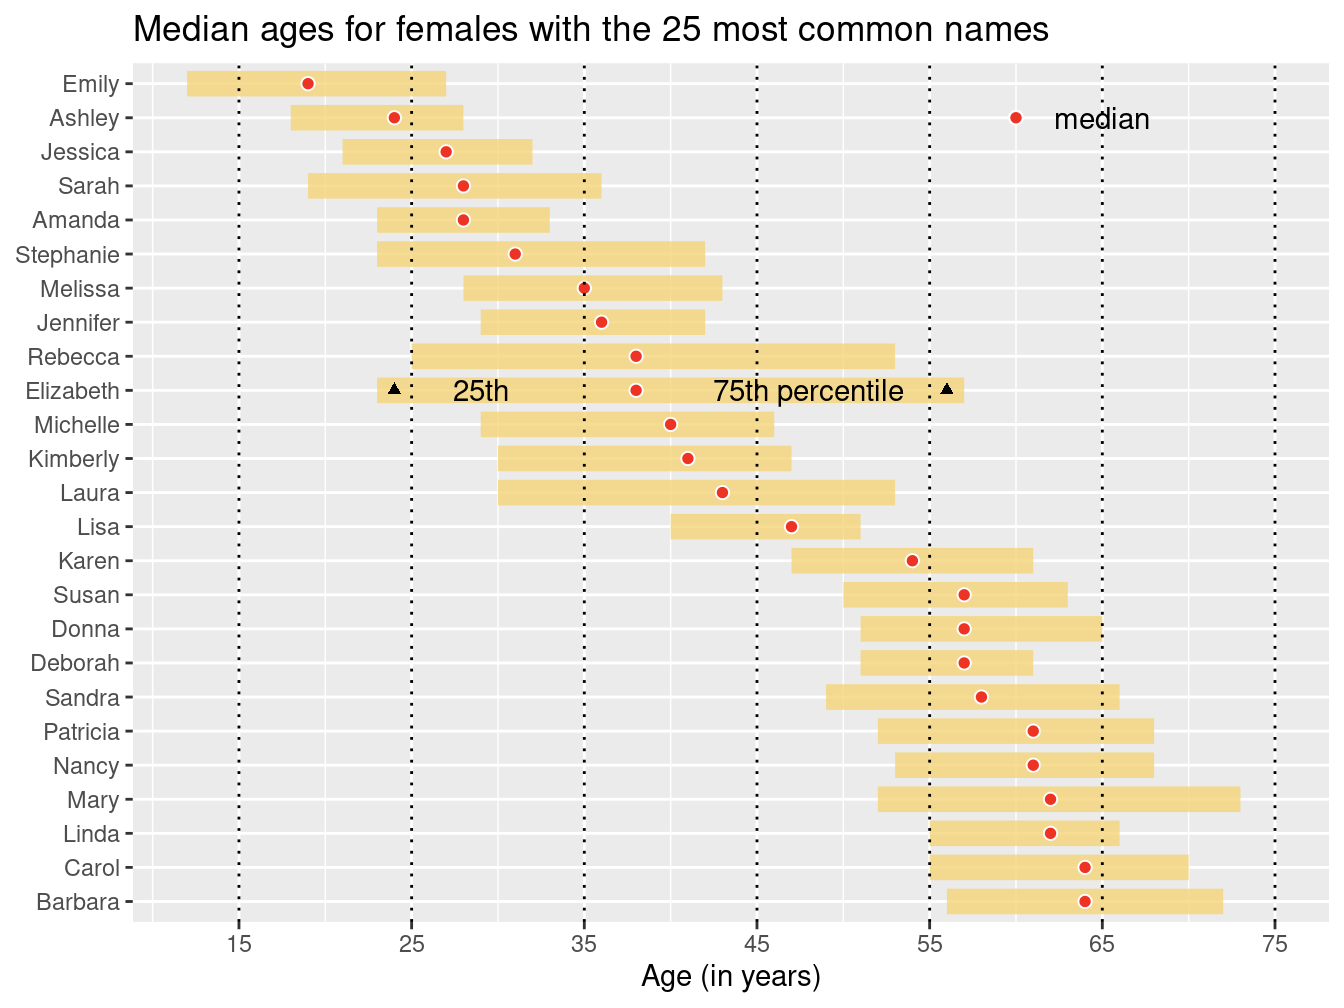 Recreation of FiveThirtyEight's plot of the age distributions for the 25 most common women's names.